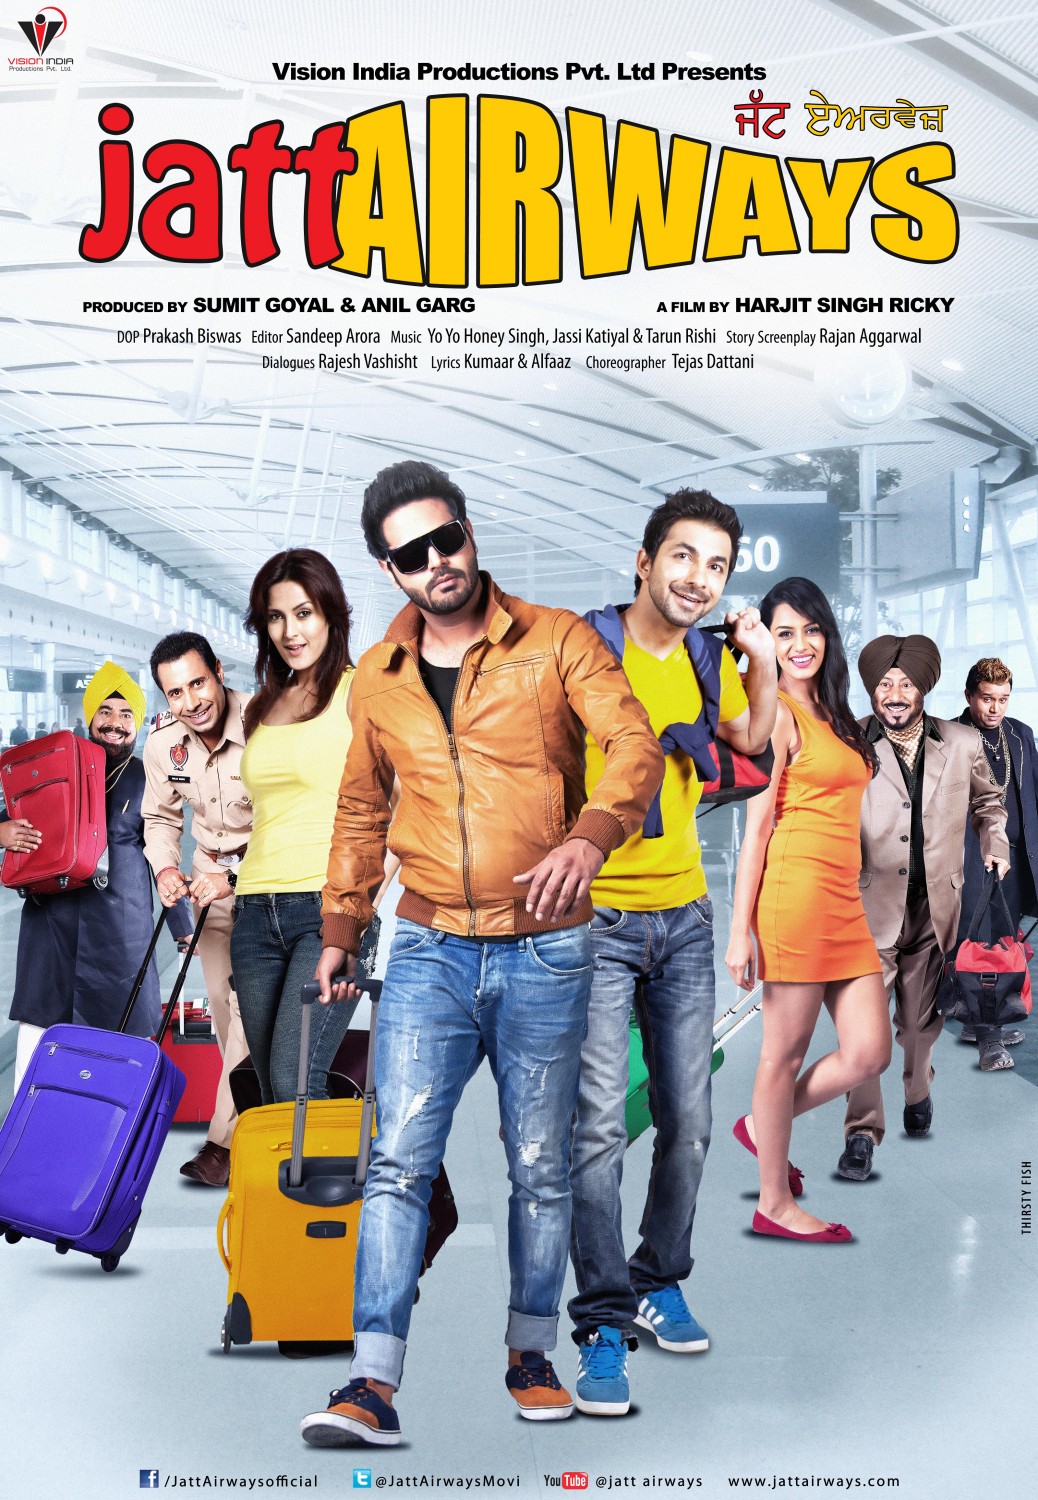 Extra Large Movie Poster Image for Jatt Airways (#3 of 8)